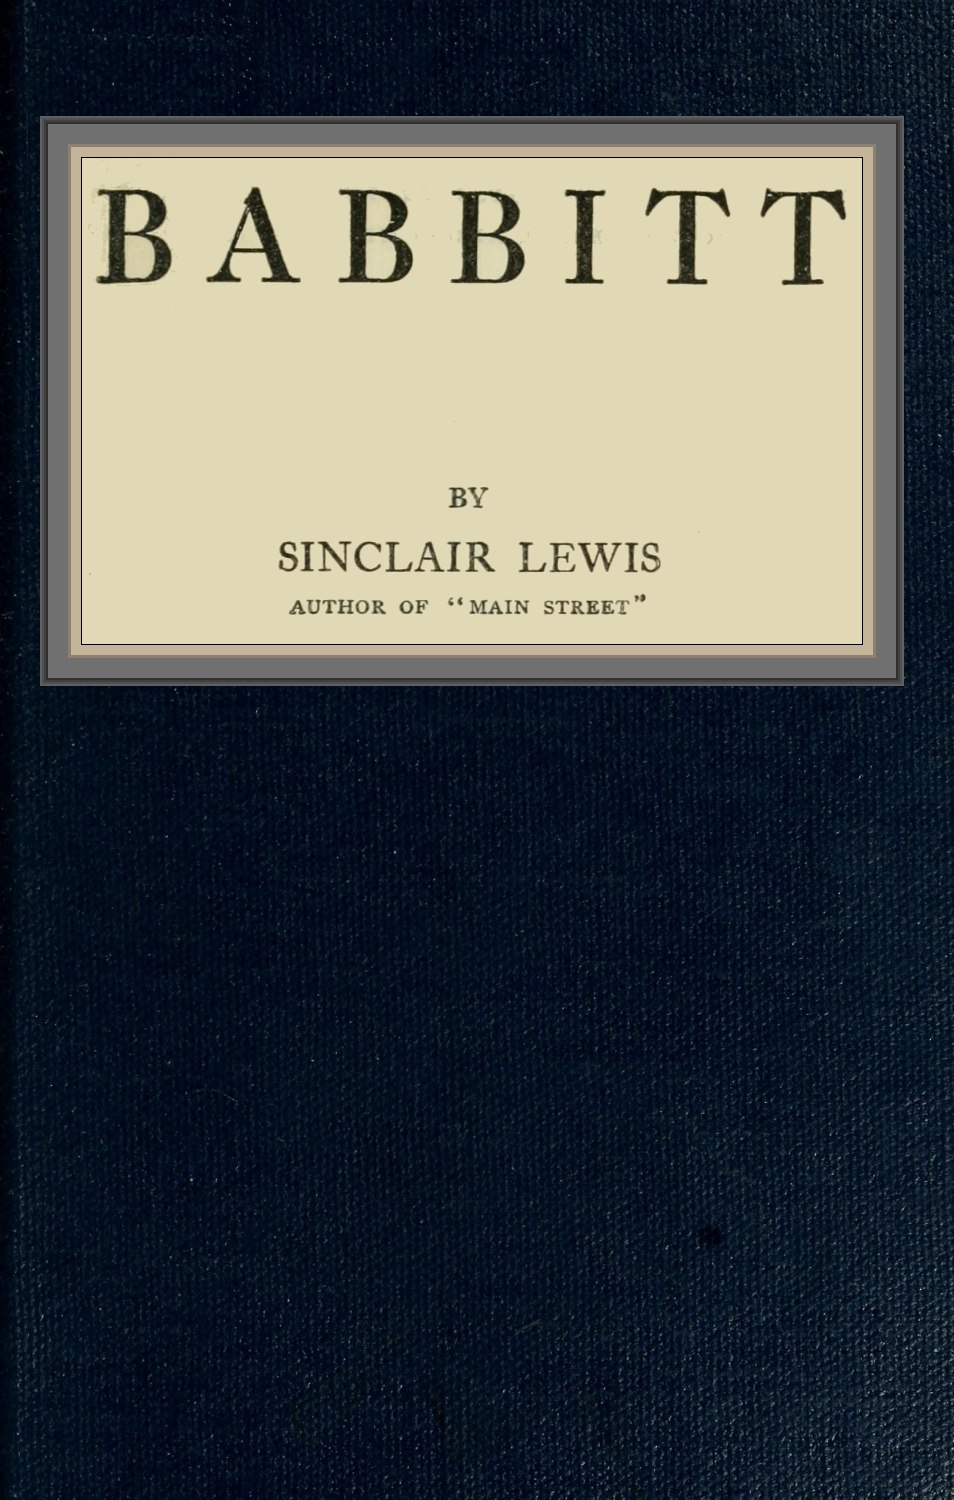 The Project Gutenberg eBook of Babbitt, by Sinclair Lewis. image